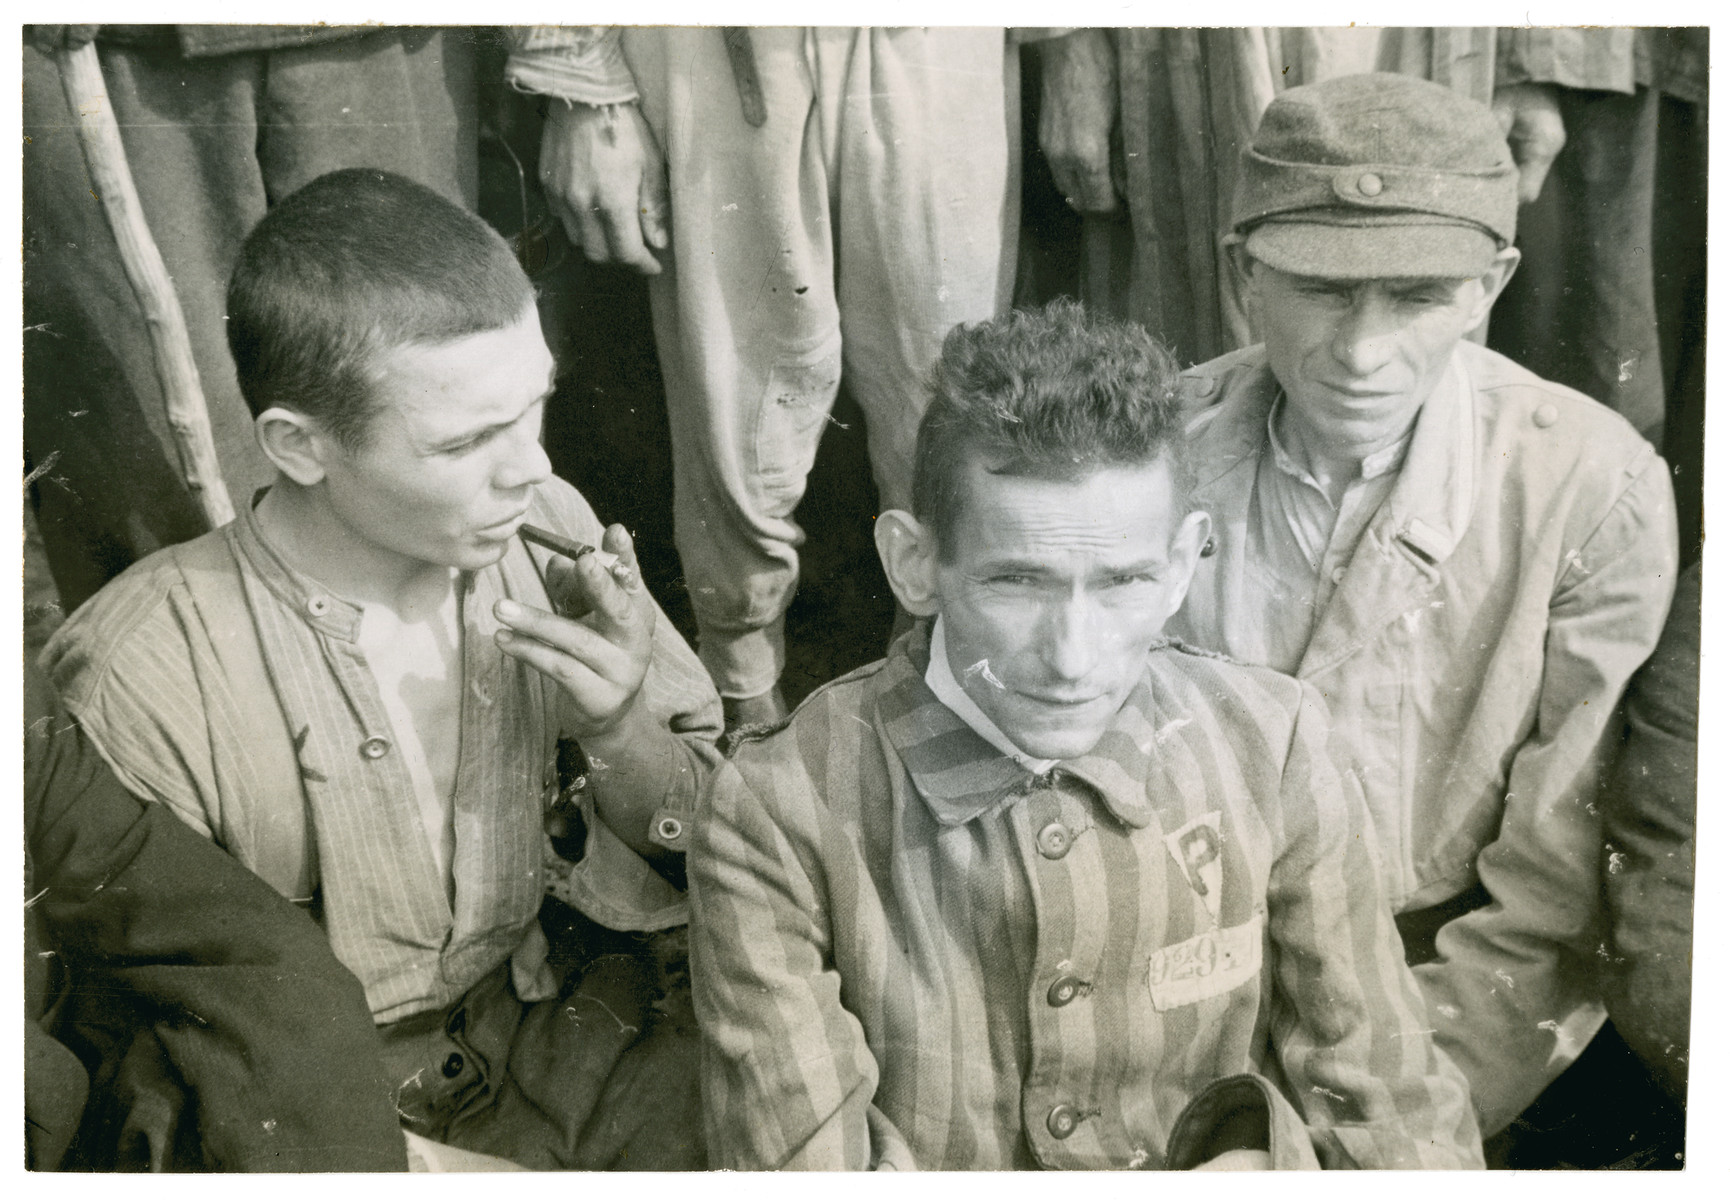 A close-up of three survivors at a gathering in the Langenstein-Zwieberge concentration camp.

The man on the right has been identified as Robert Nardou.